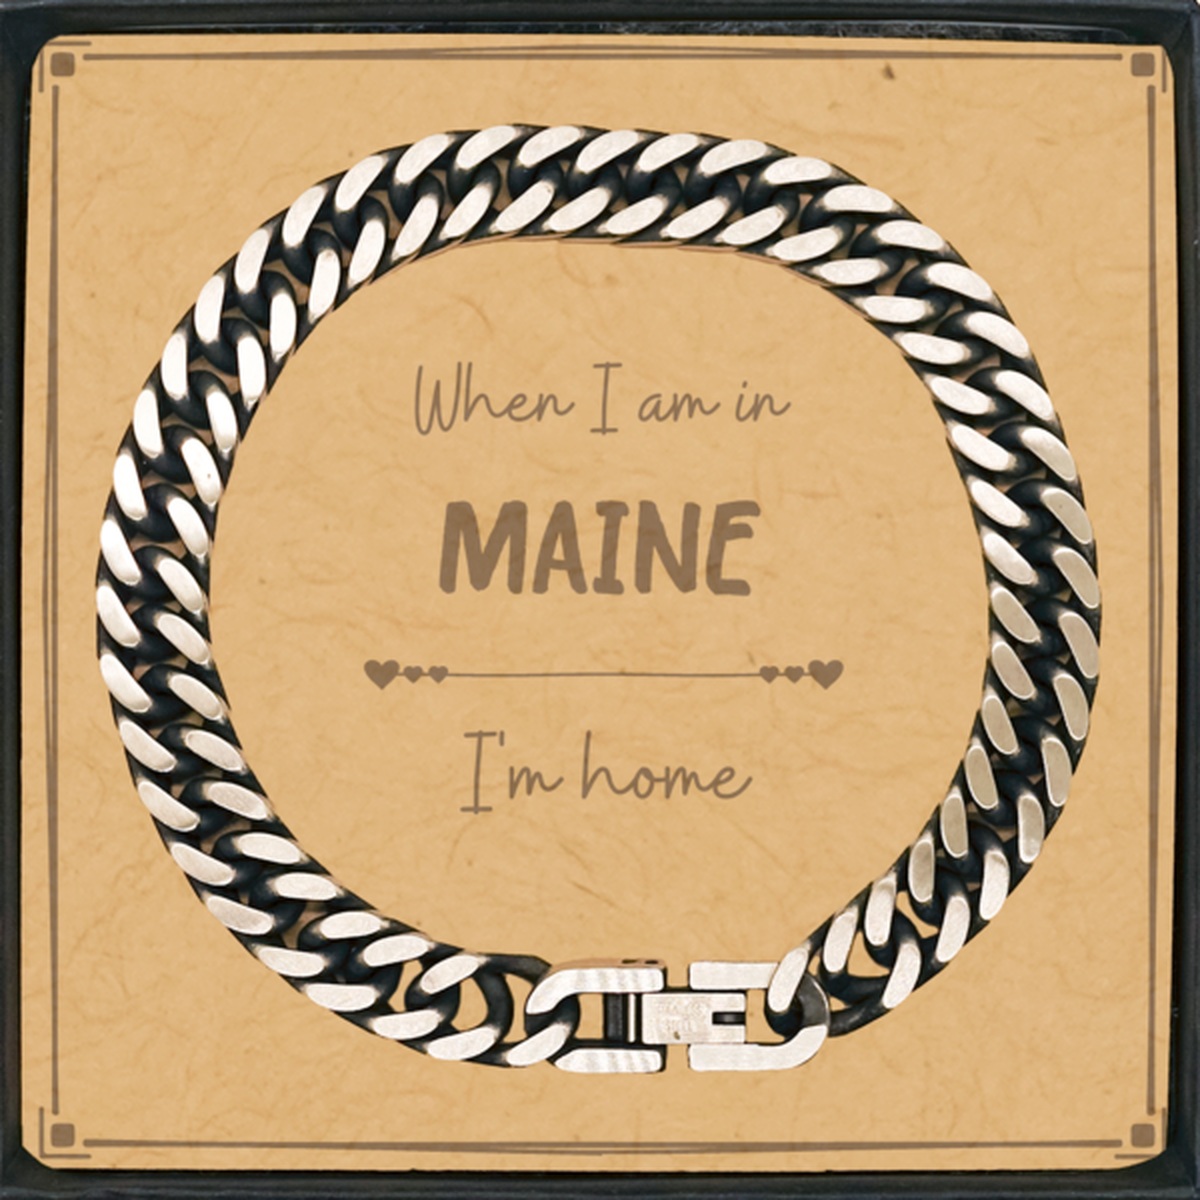 When I am in Maine I'm home Cuban Link Chain Bracelet, Message Card Gifts For Maine, State Maine Birthday Gifts for Friends Coworker